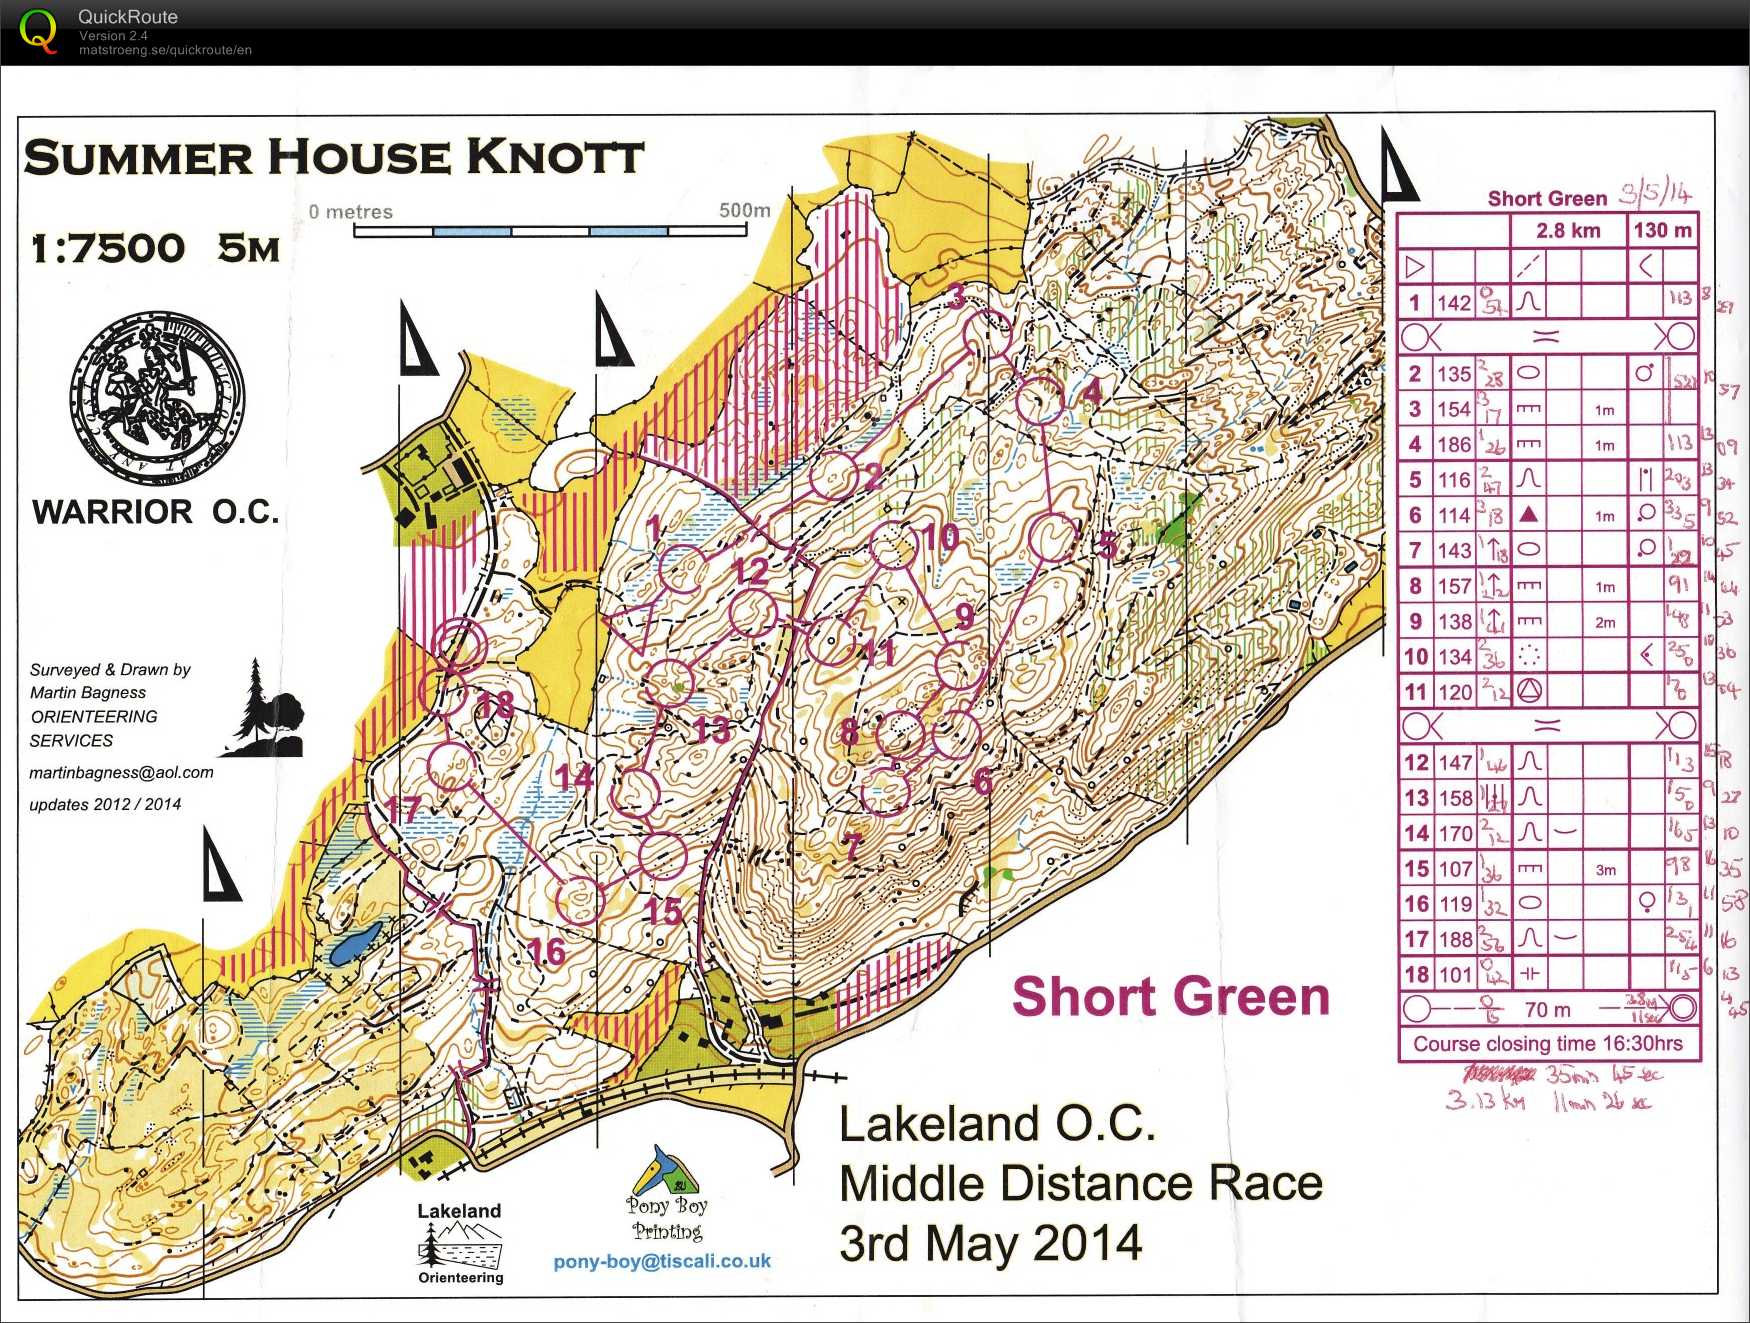 Northern Championships Weekend & UK Orienteering League, Middle Distance (03.05.2014)